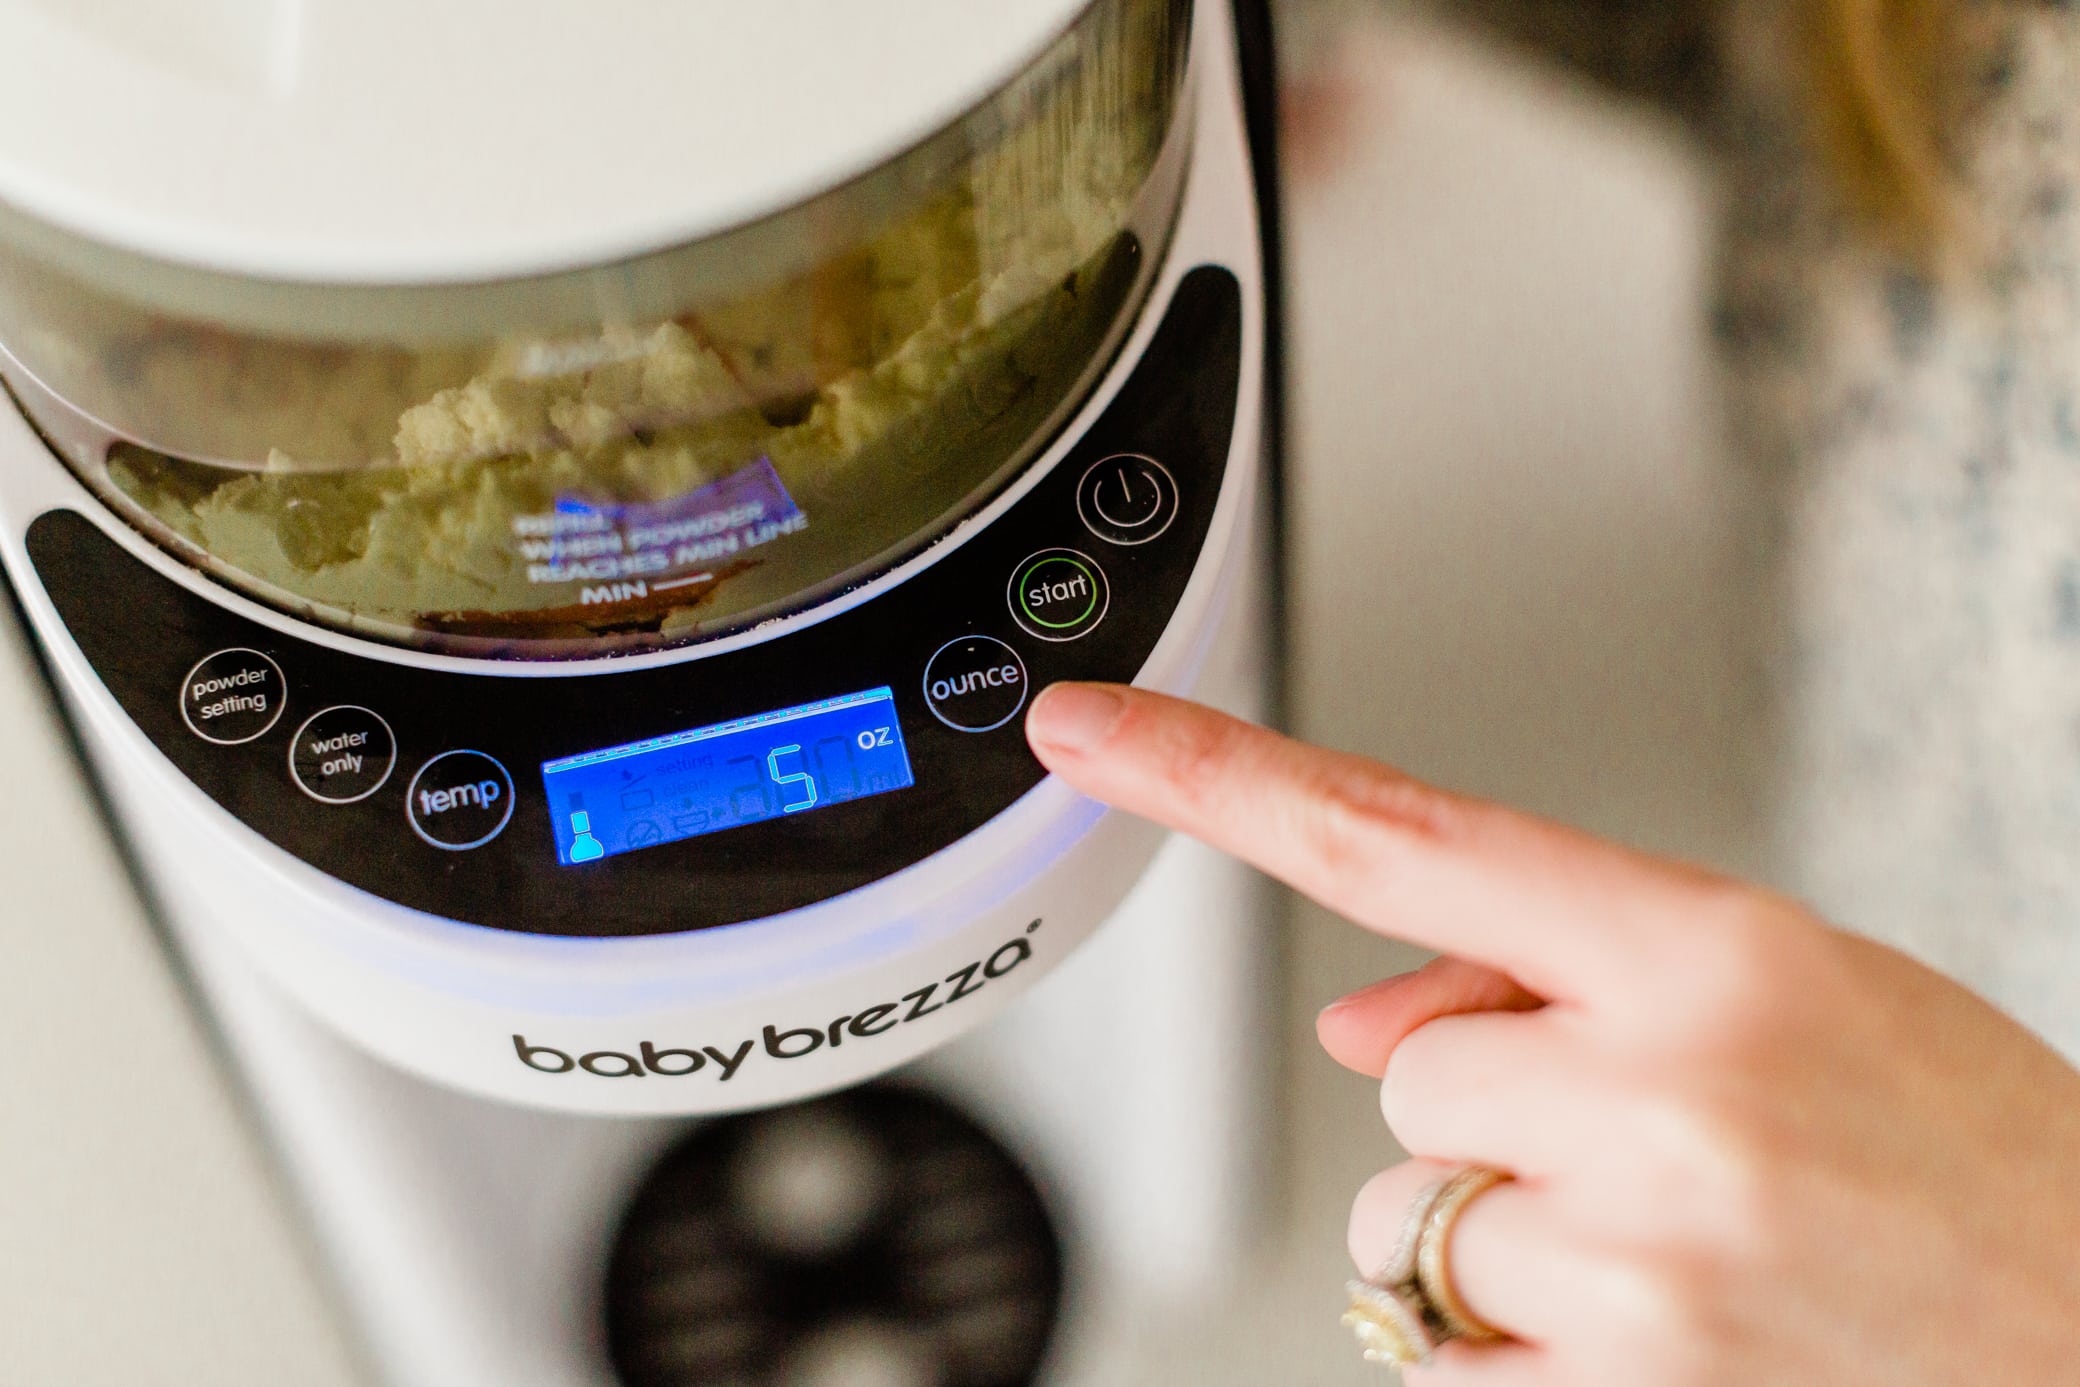 Selecting the ounce amount on the Baby Brezza Formula Pro.